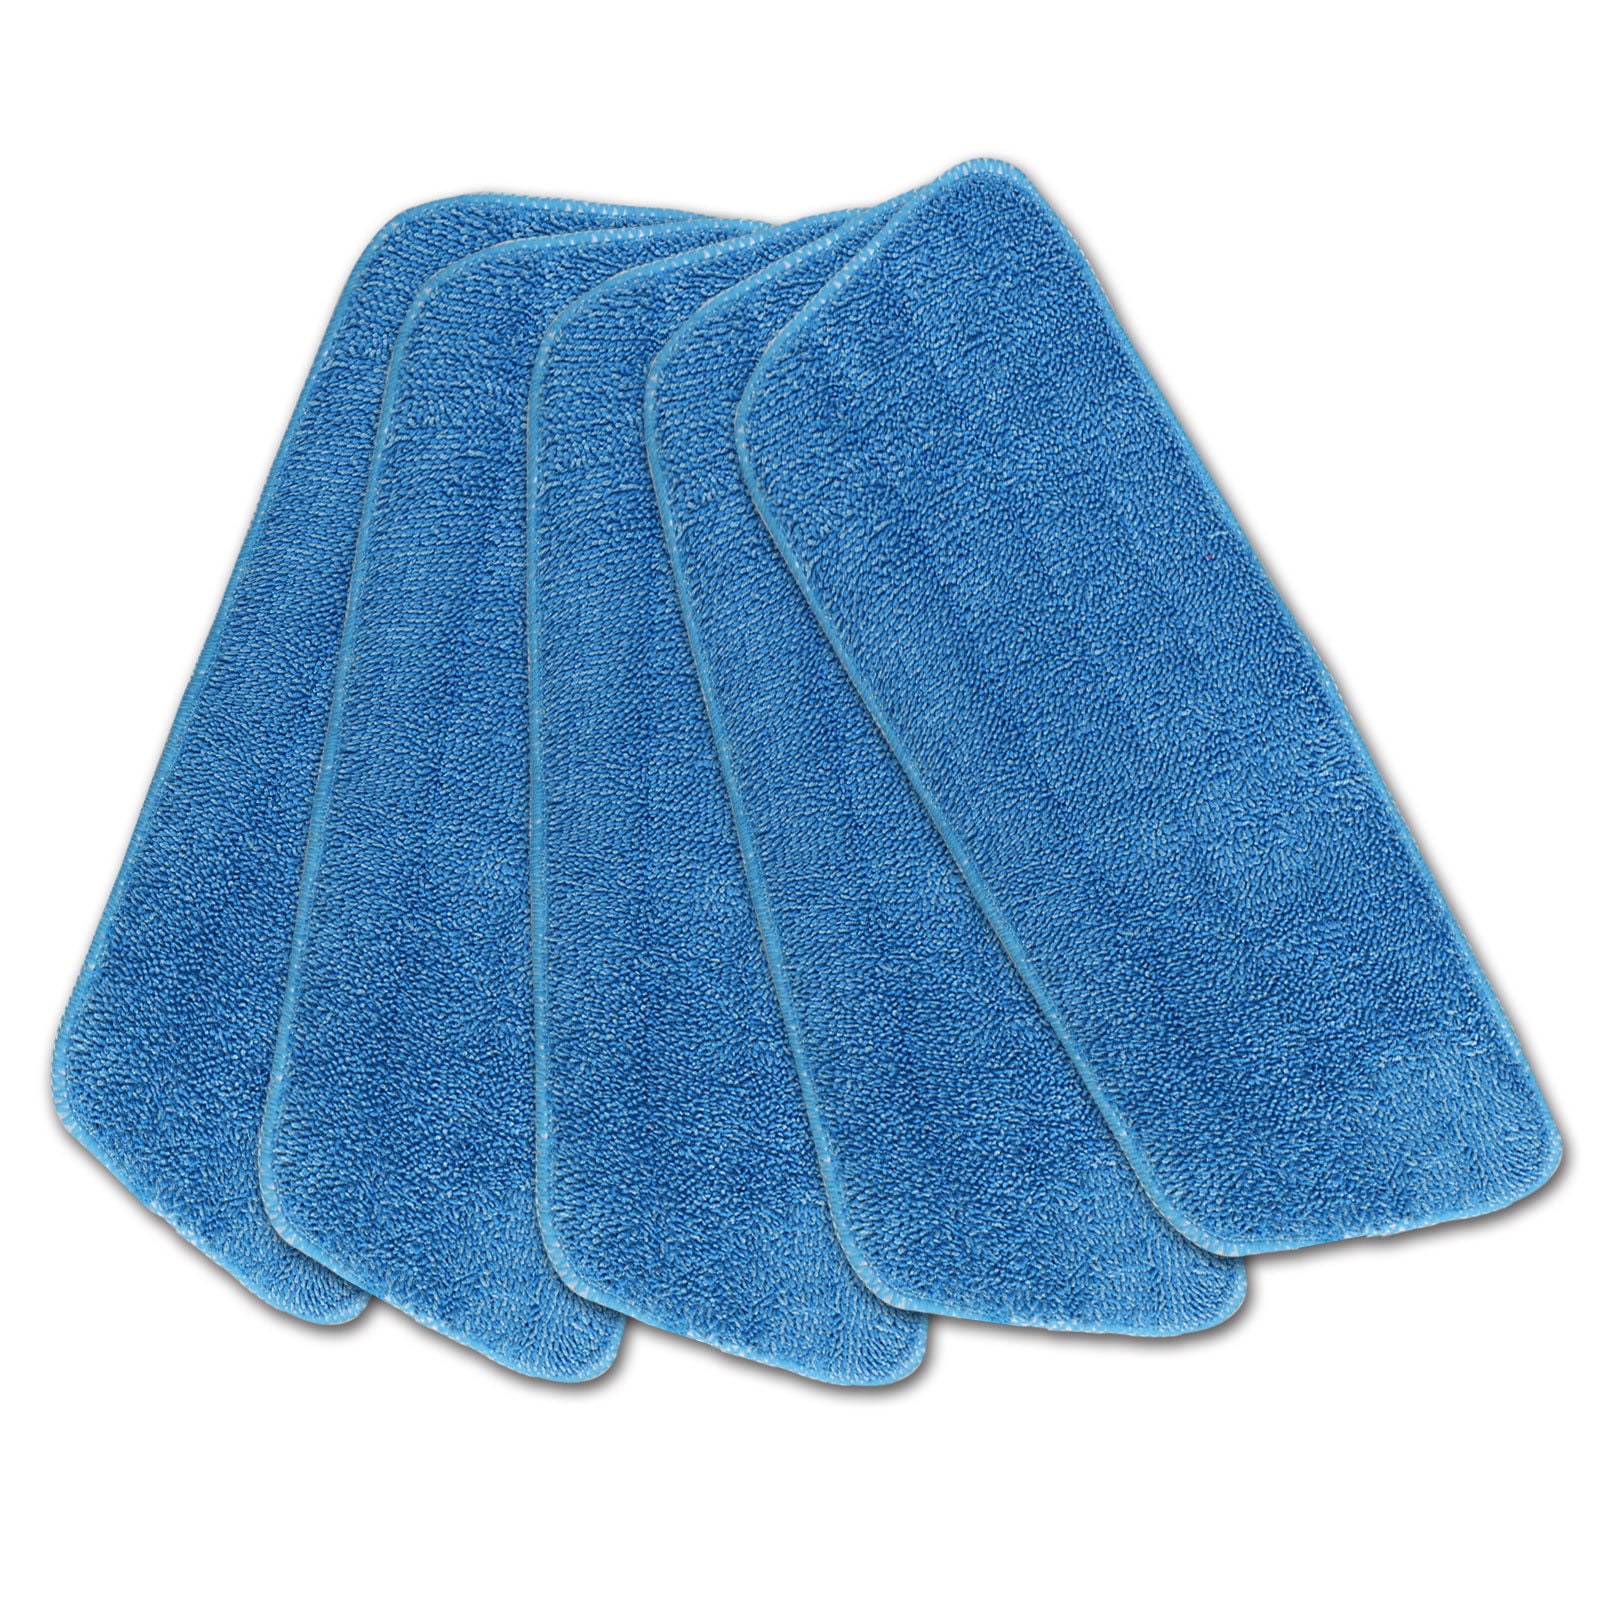 Pack of 6 Commercial 18" x 5.5" Microfiber Washable Wet or Dry Mop Refill Pads 